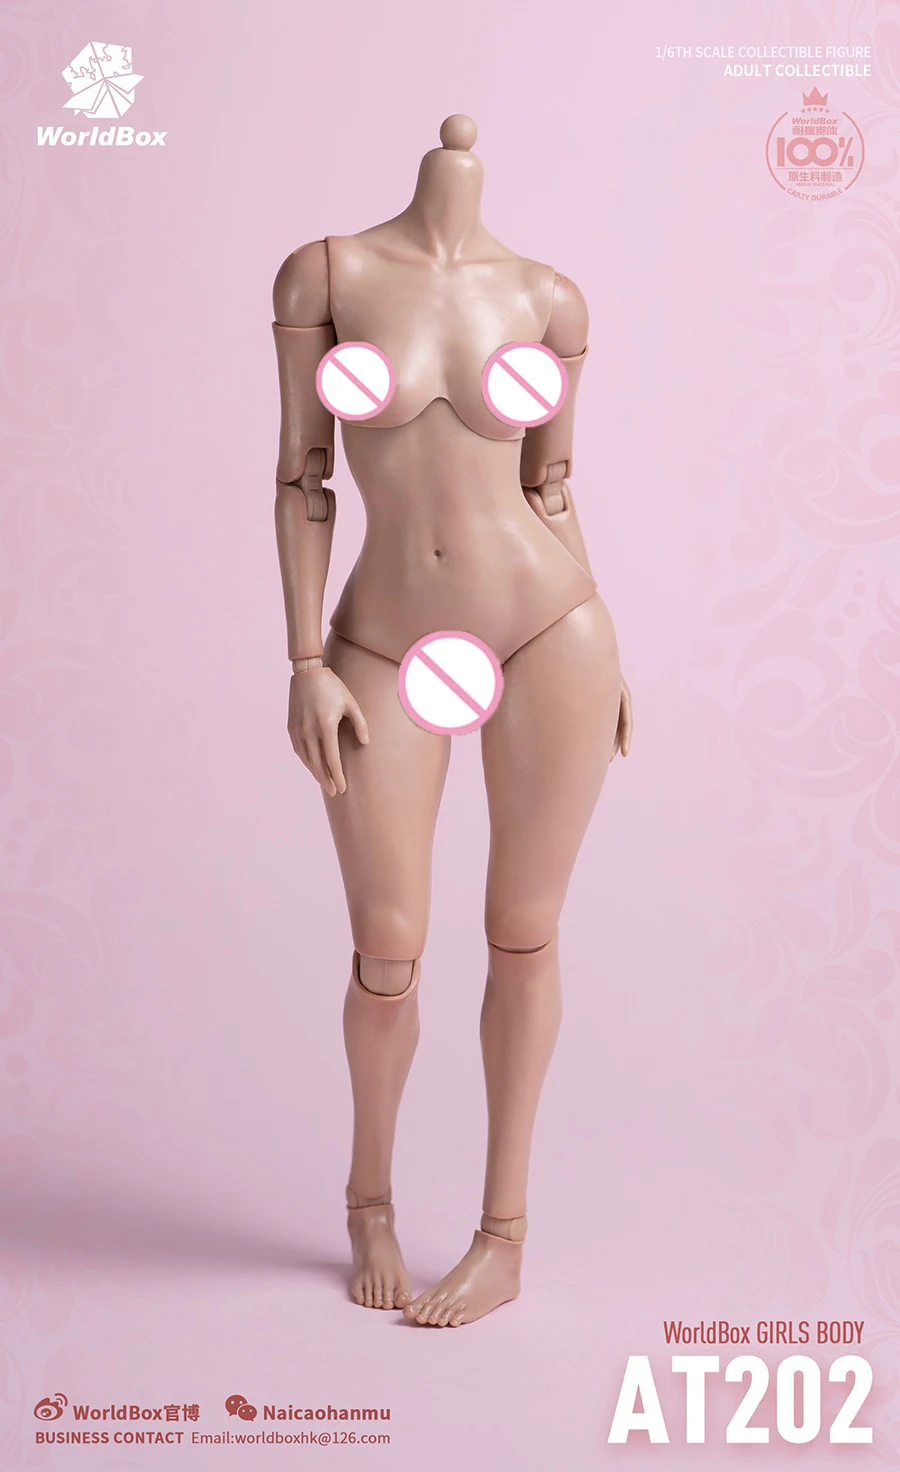 Worldbox 1/6 Female D Cup E Cup Breast Big Bust Replacement